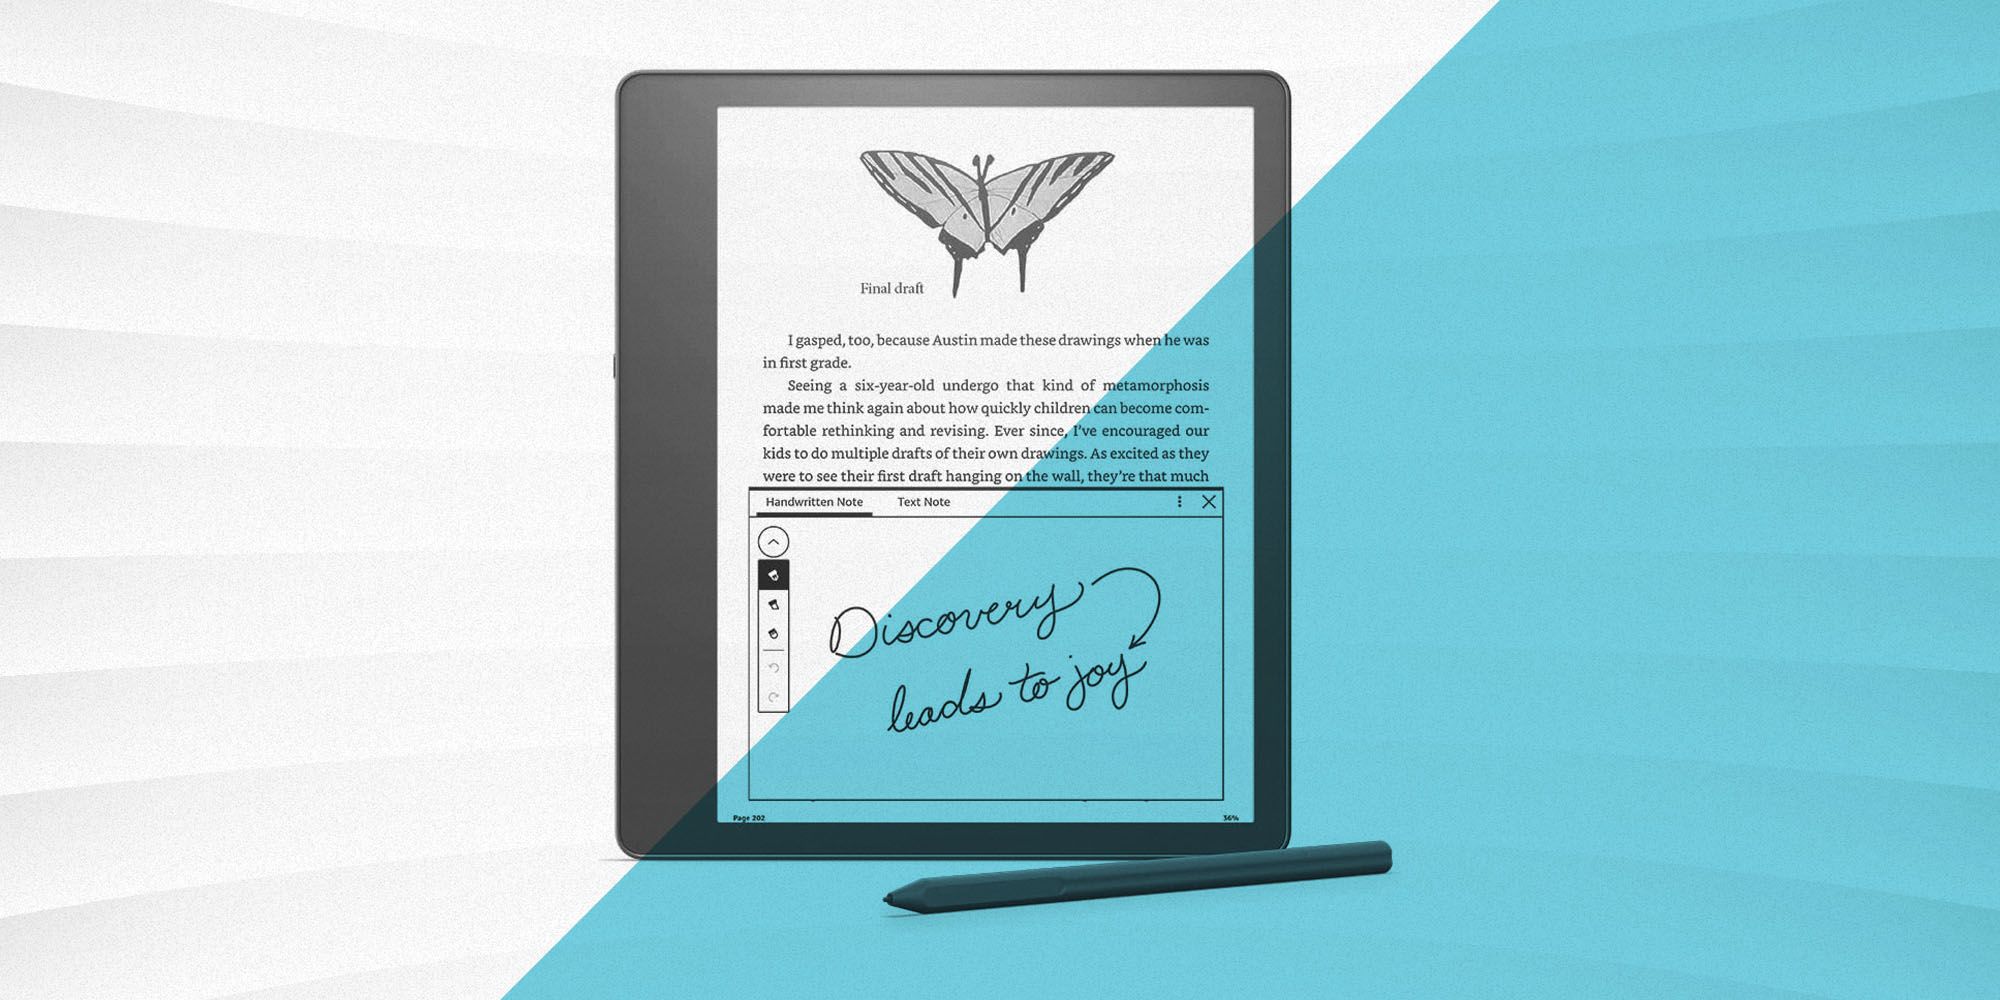 This e-ink tablet is one that you should take note of